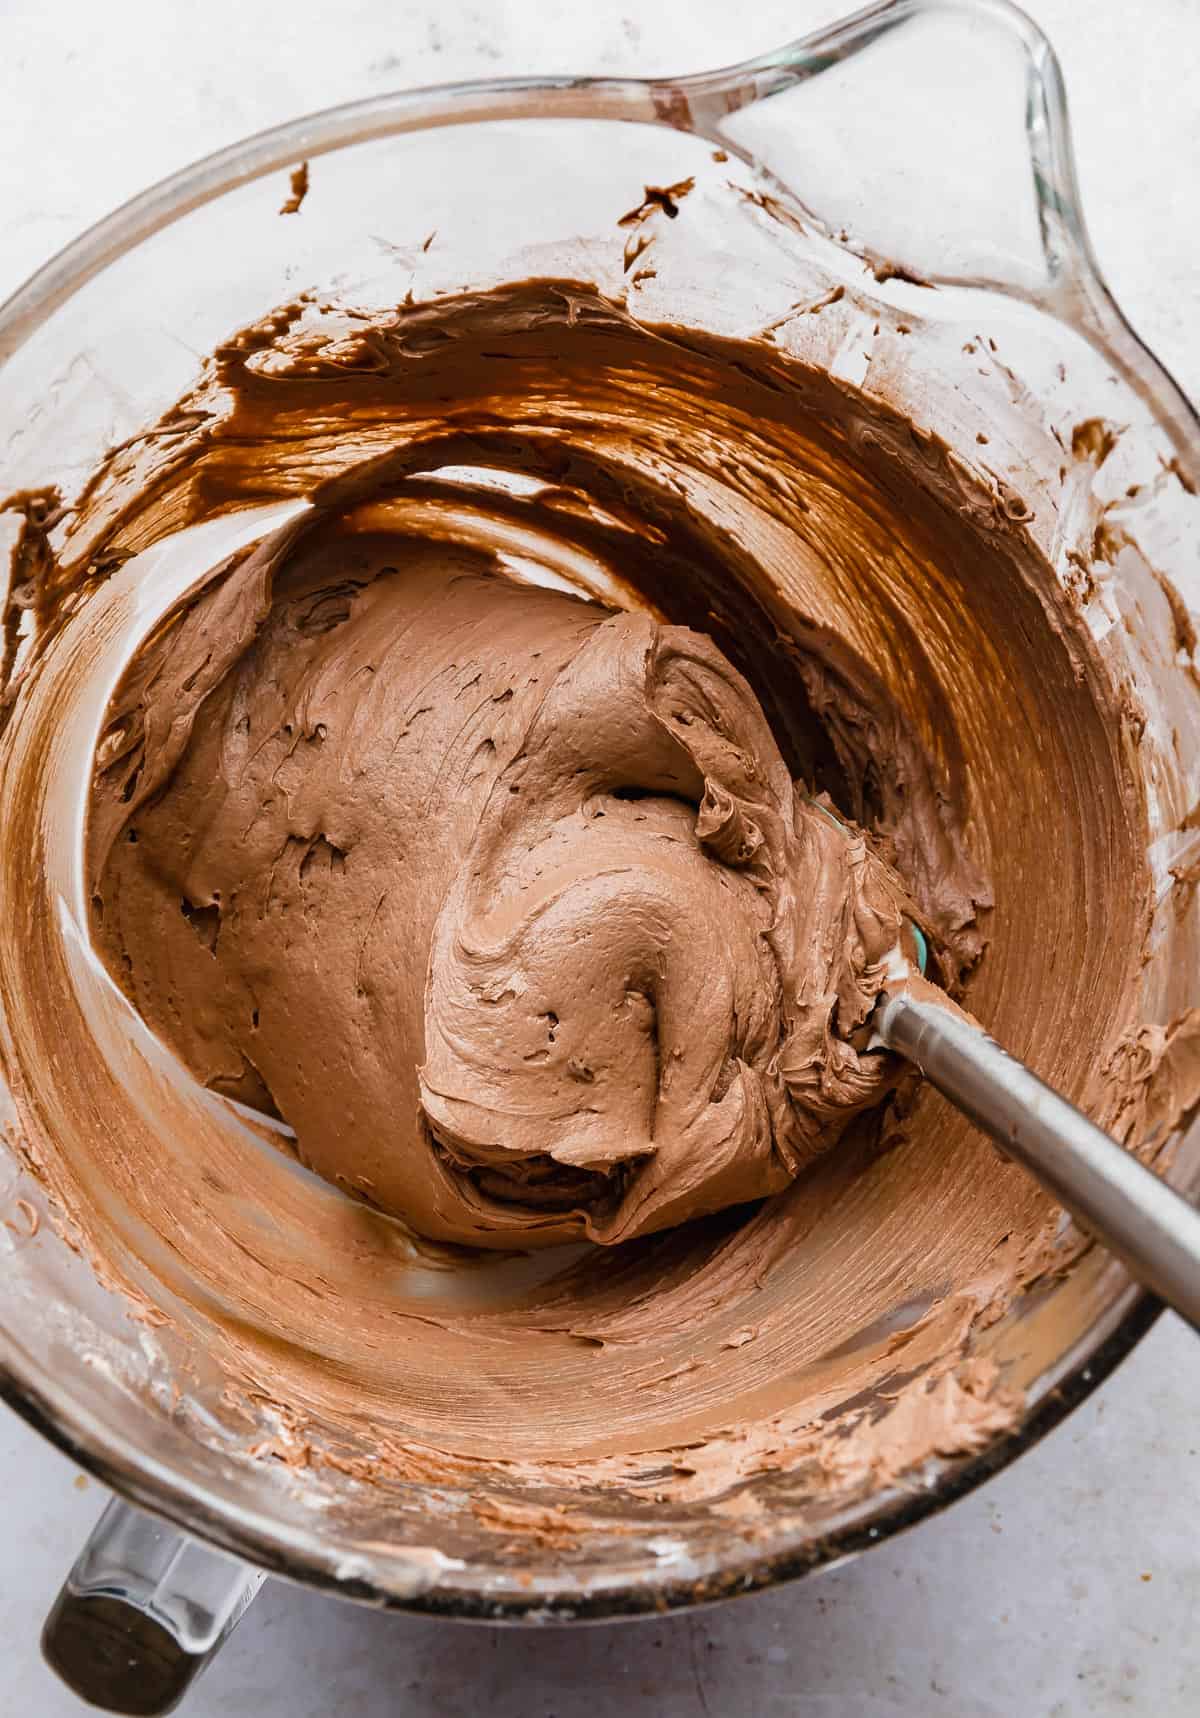 A spatula stirring a thick and creamy chocolate buttercream frosting made with melted chocolate, in a glass bowl.